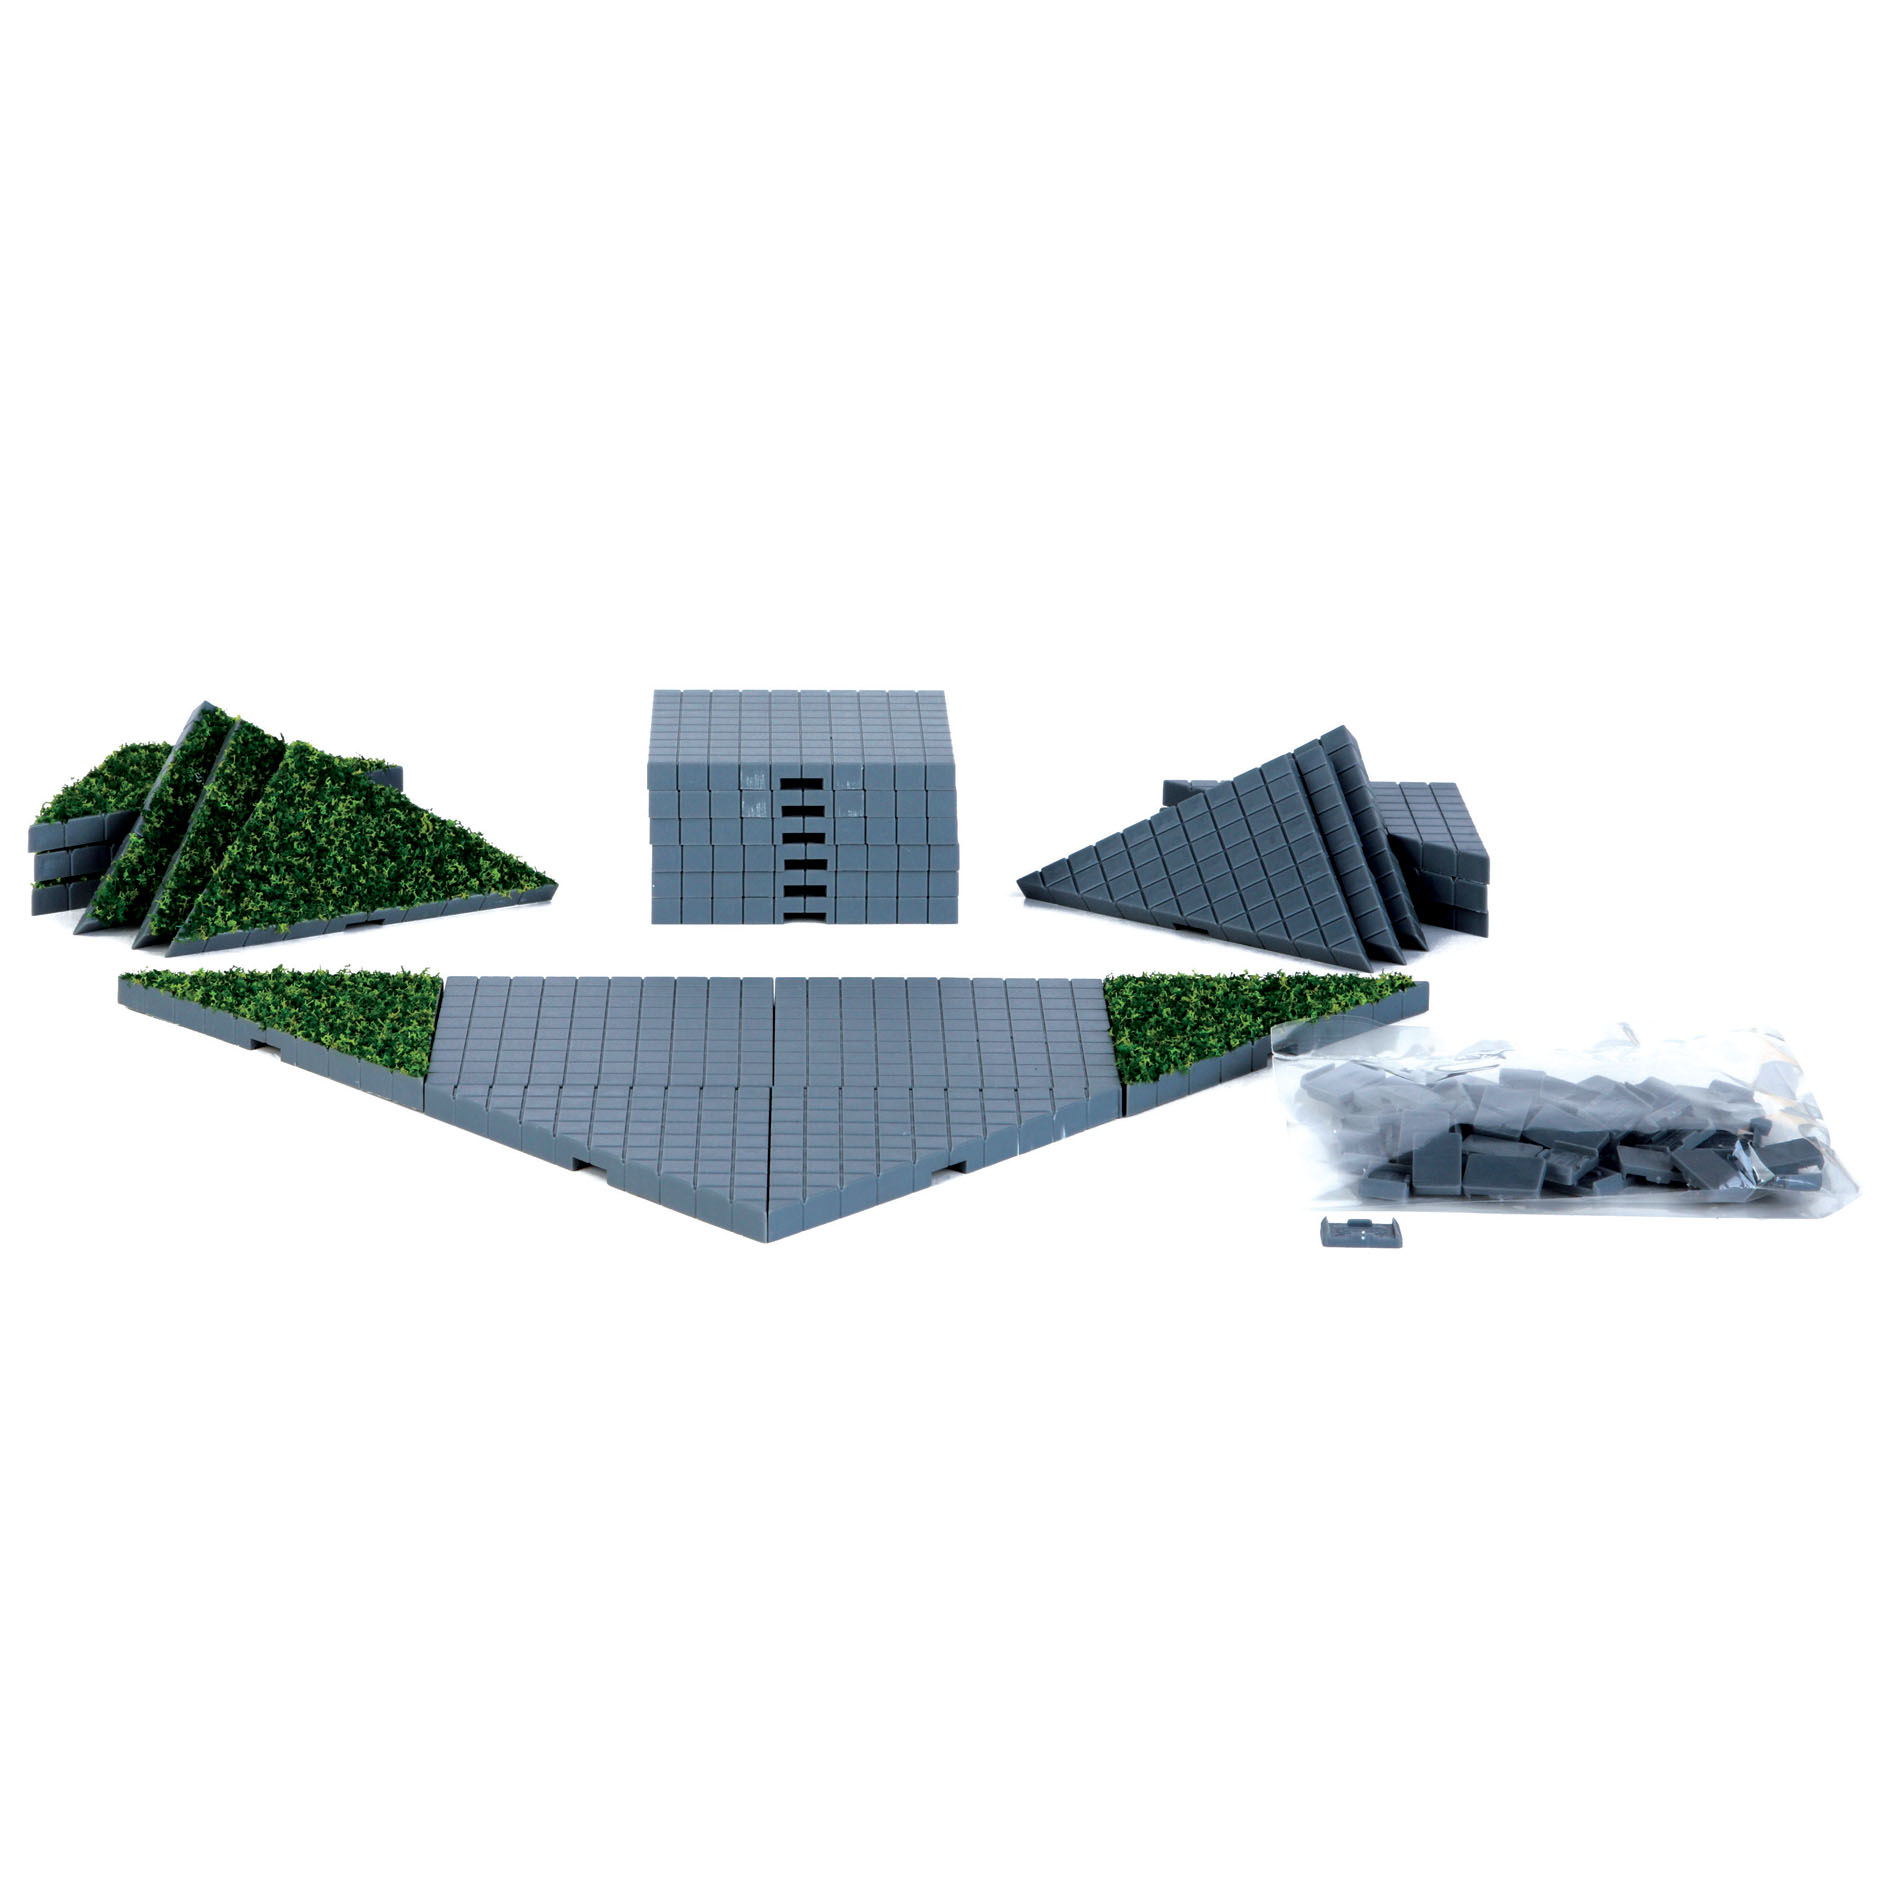 Lemax Village Collection Christmas Village Accessory, Plaza System (Grey, Triangle Grass) - 24 Pcs